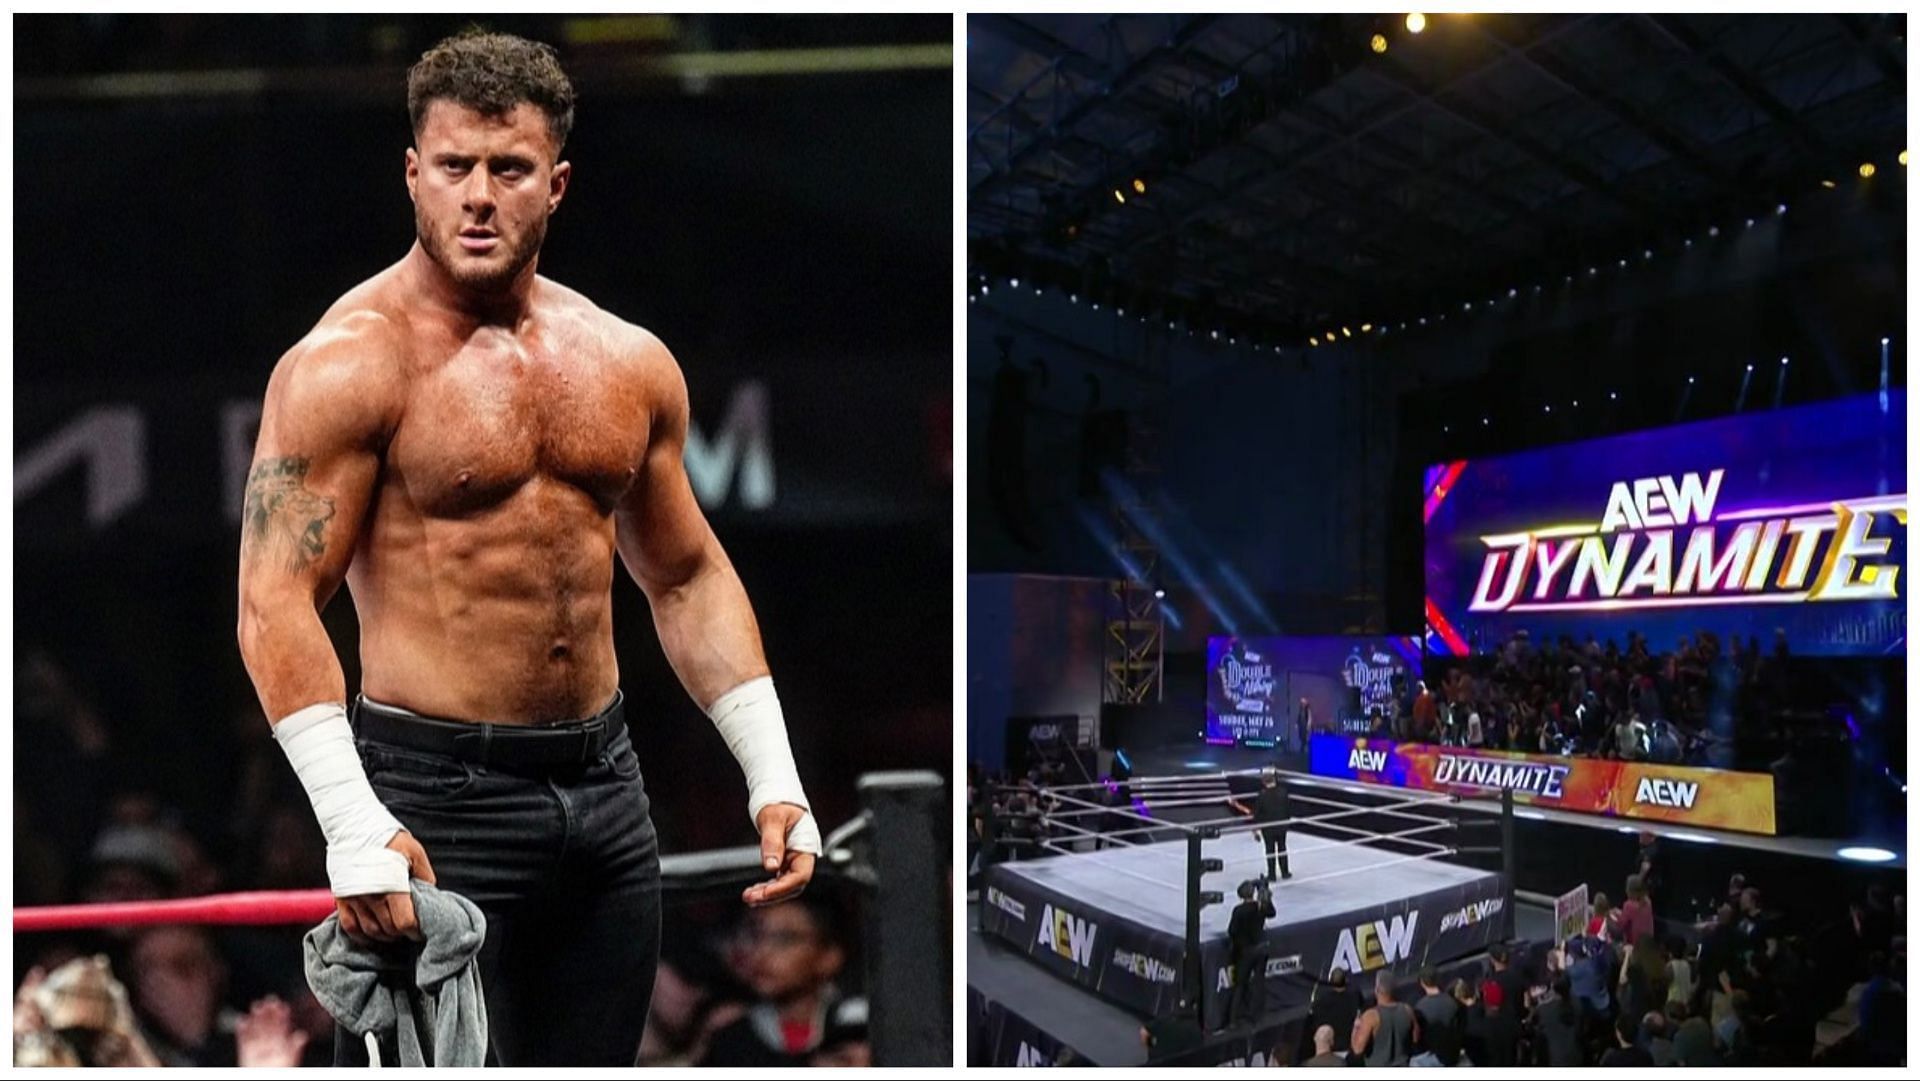 MJF poses in the ring on AEW Rampage, Fans pack Daily